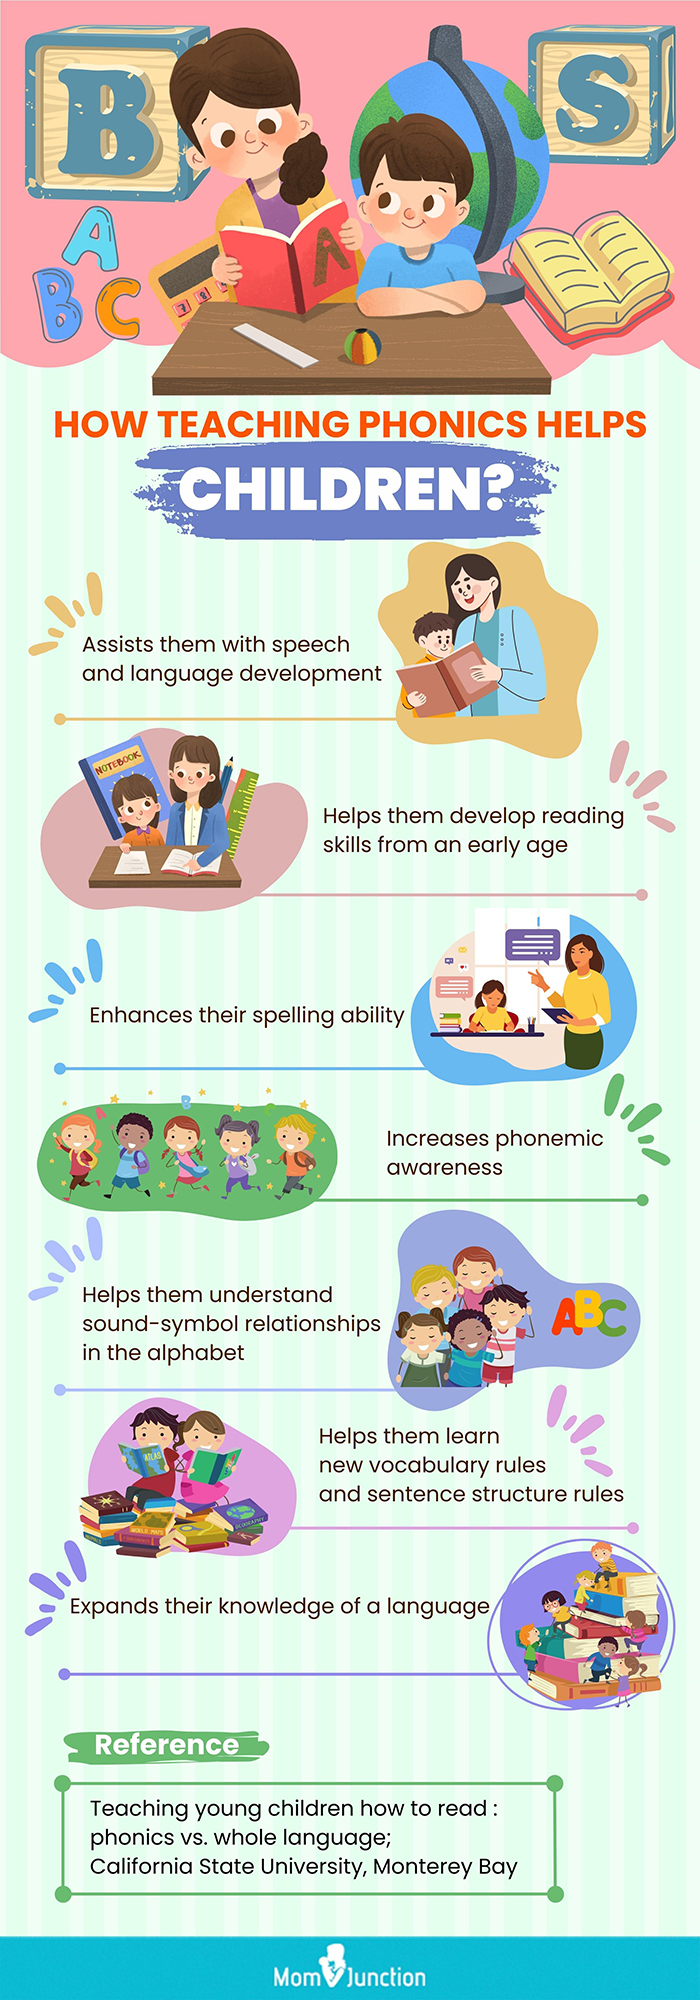 how to teah phonics for children (infographic)